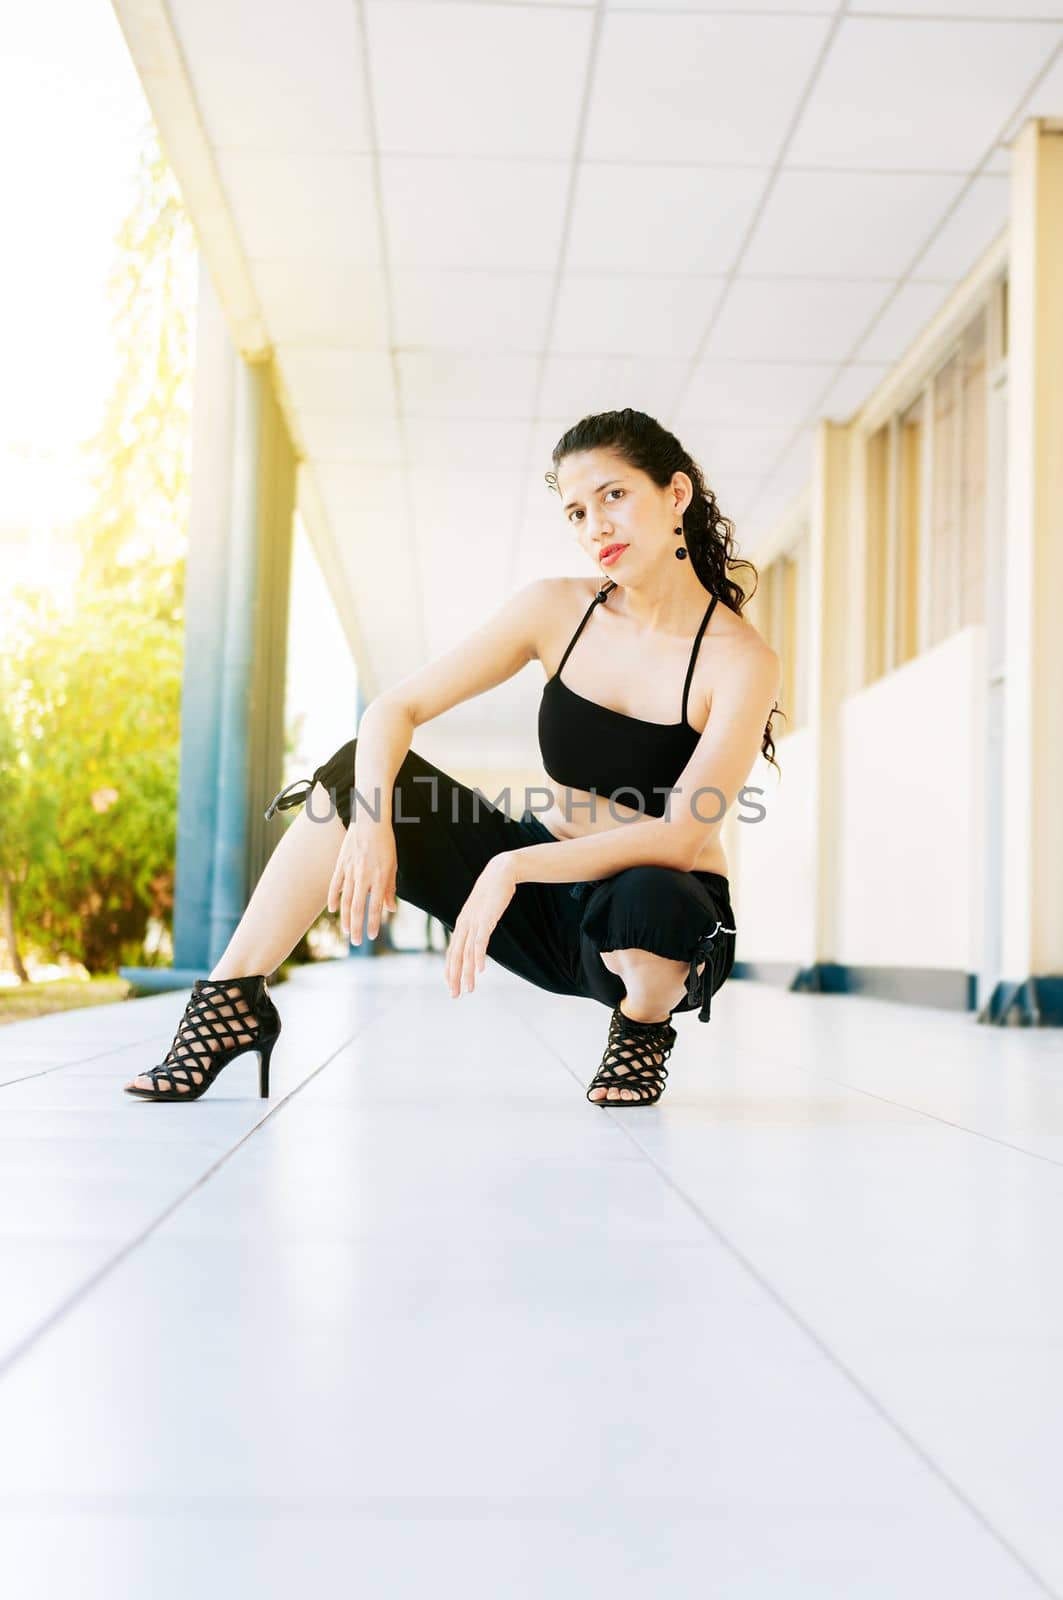 Dance artist woman in high heels outdoors. Portrait of dance girl in high heels crouching on the floor. Portrait of dancer Woman in heels on the floor looking at the camera. by isaiphoto